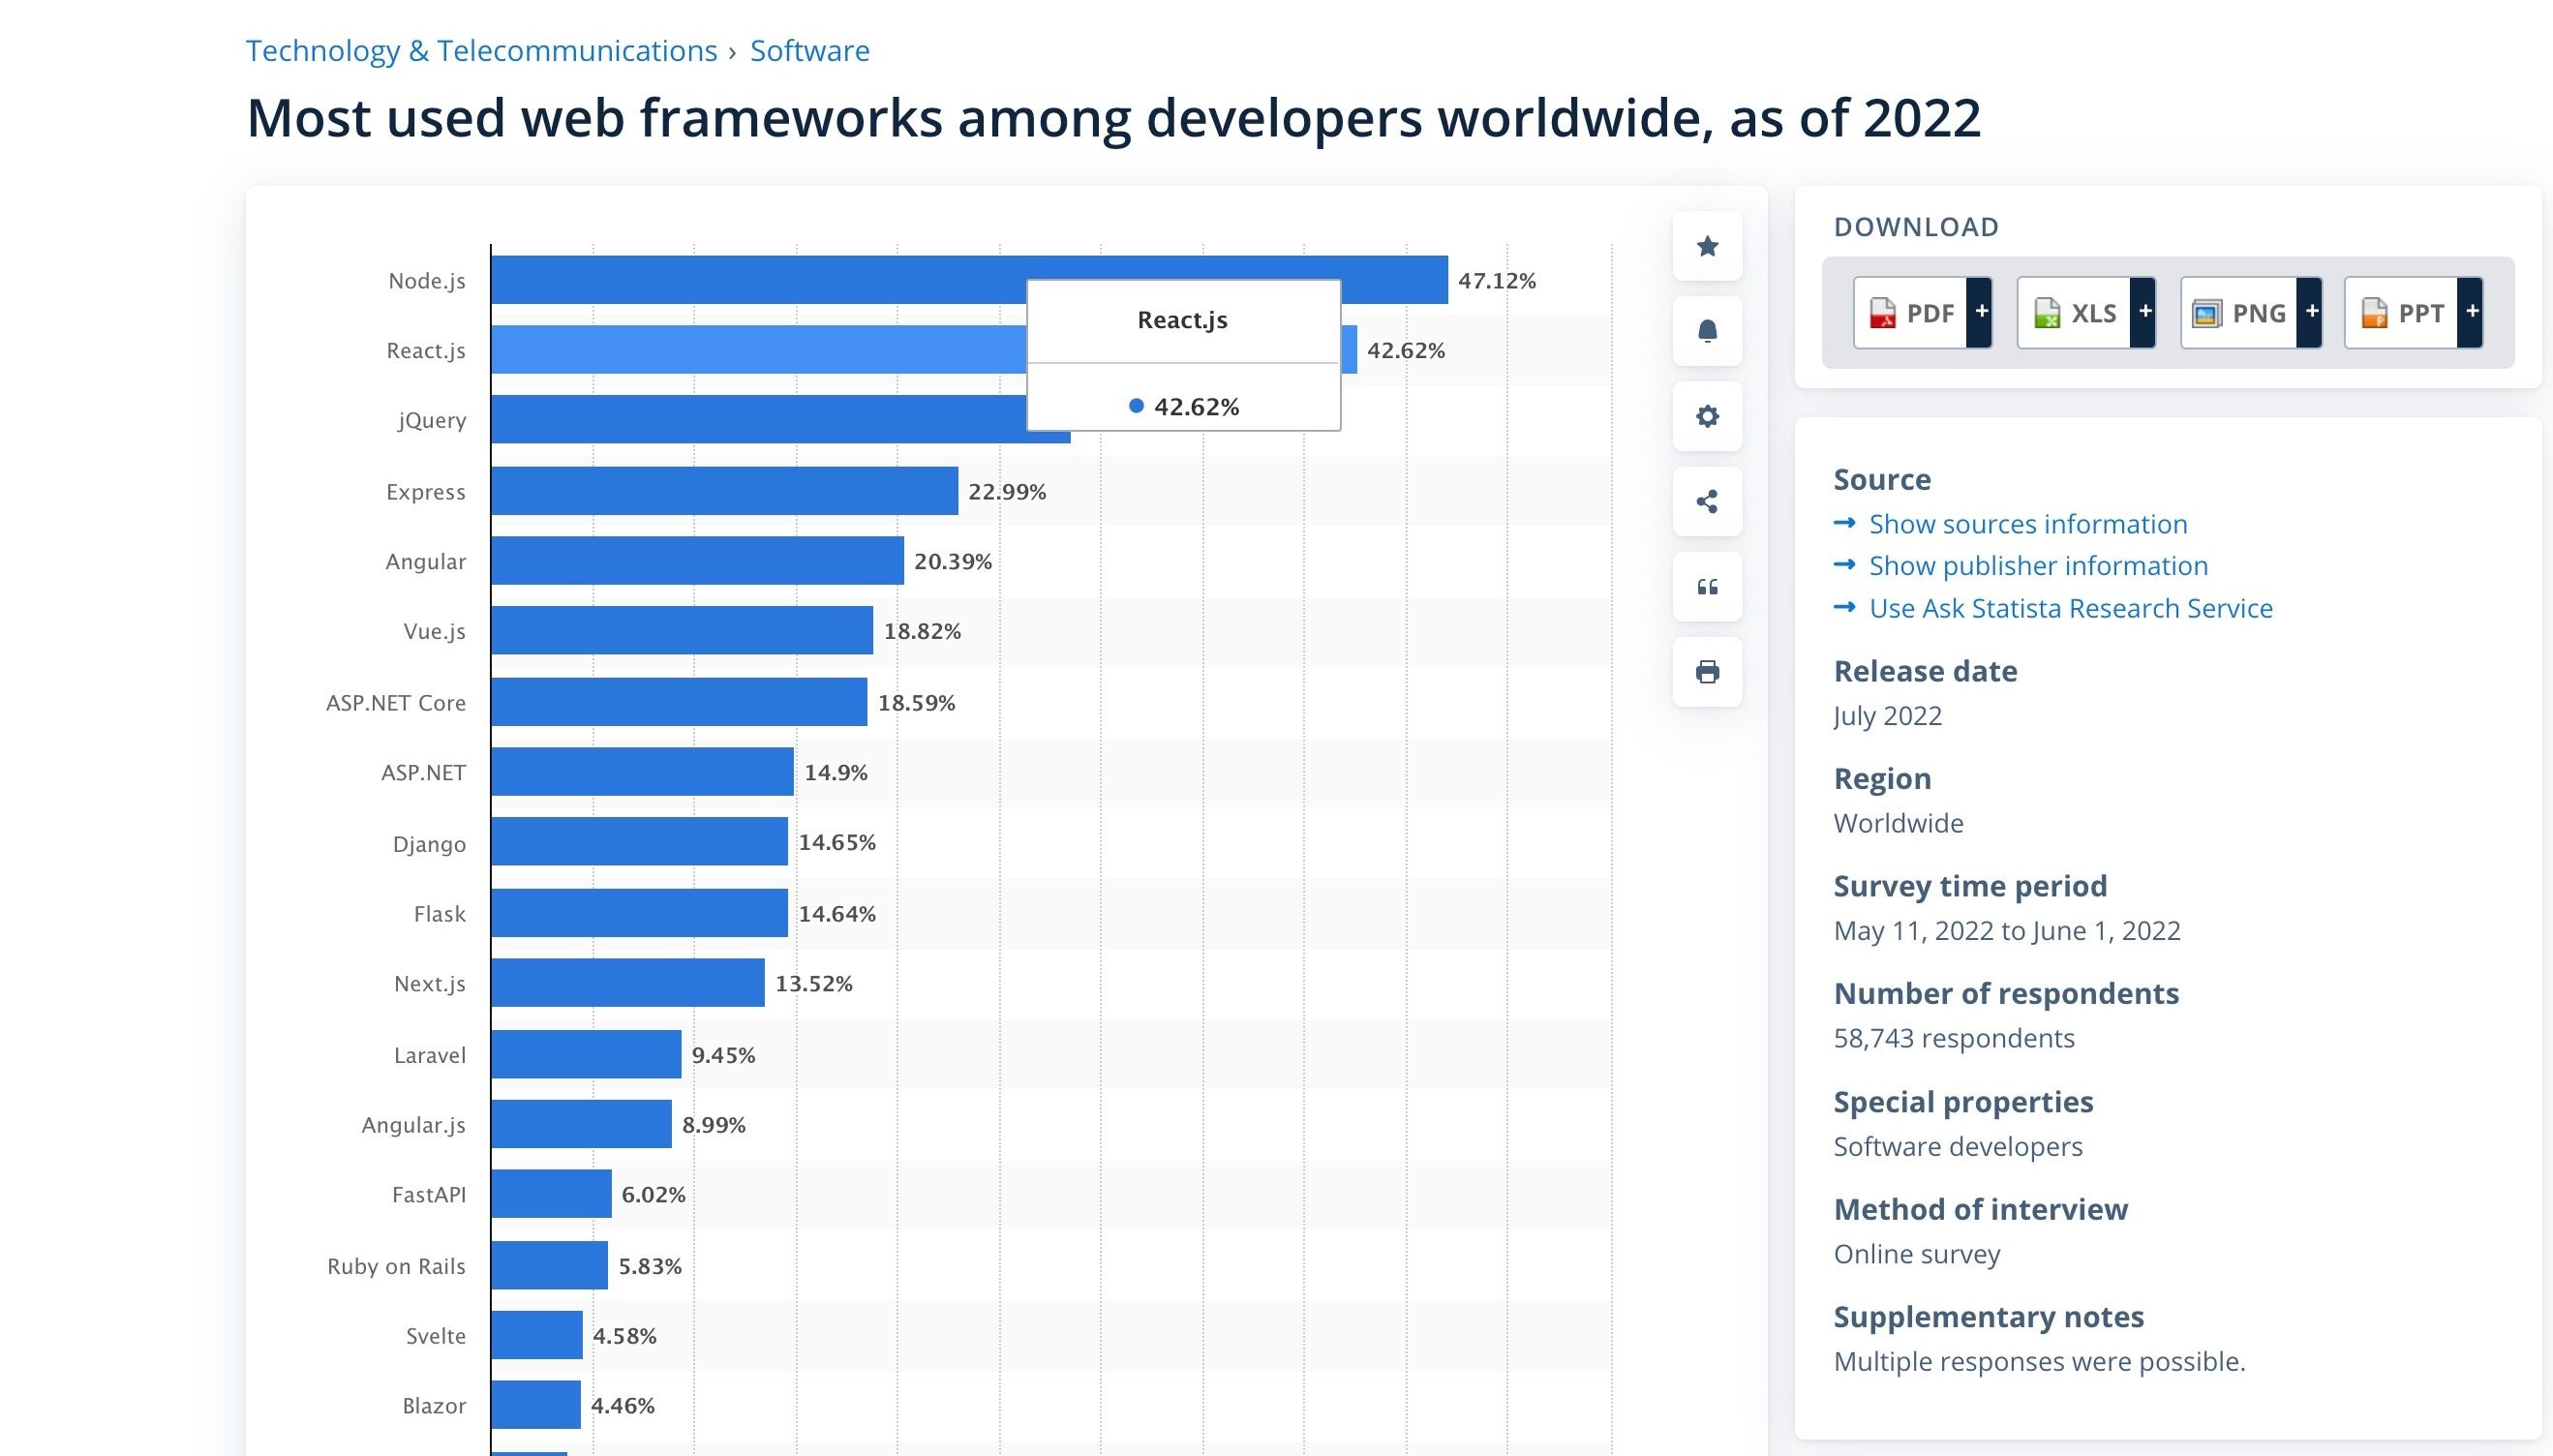 A bar chart of the most used frameworks by developers worldwide